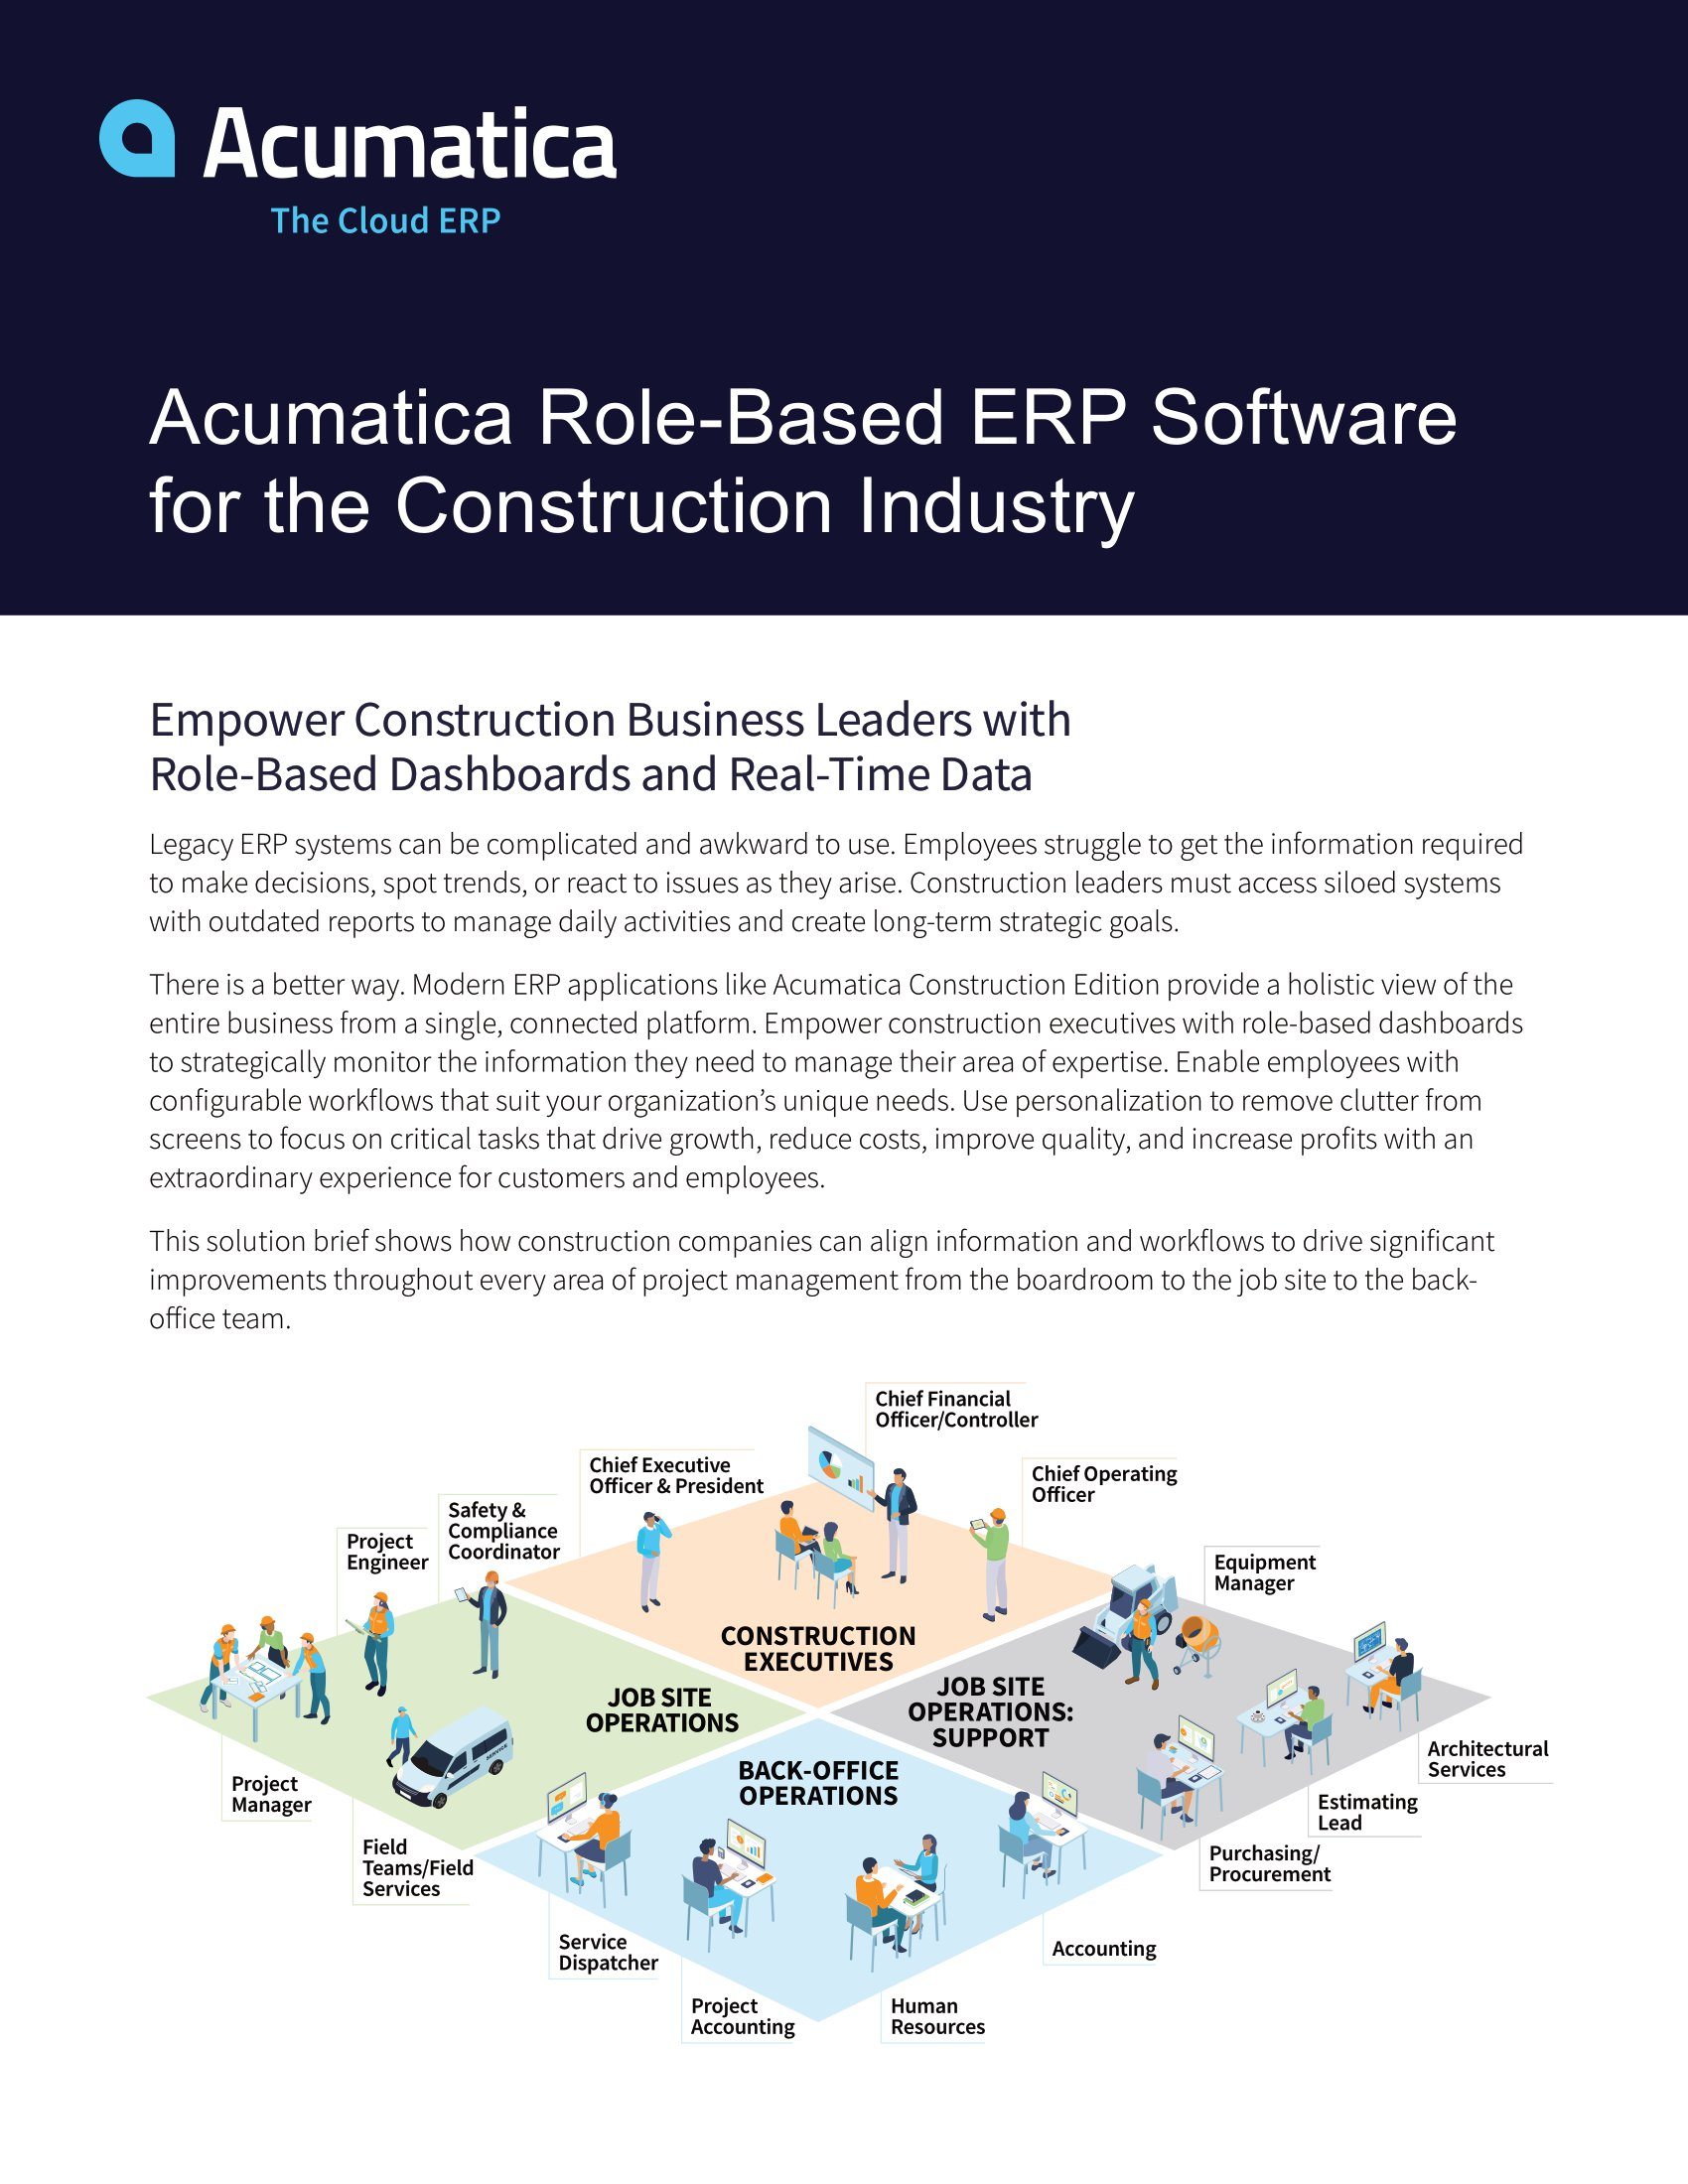 Multiple Construction Roles Only Require One ERP Platform